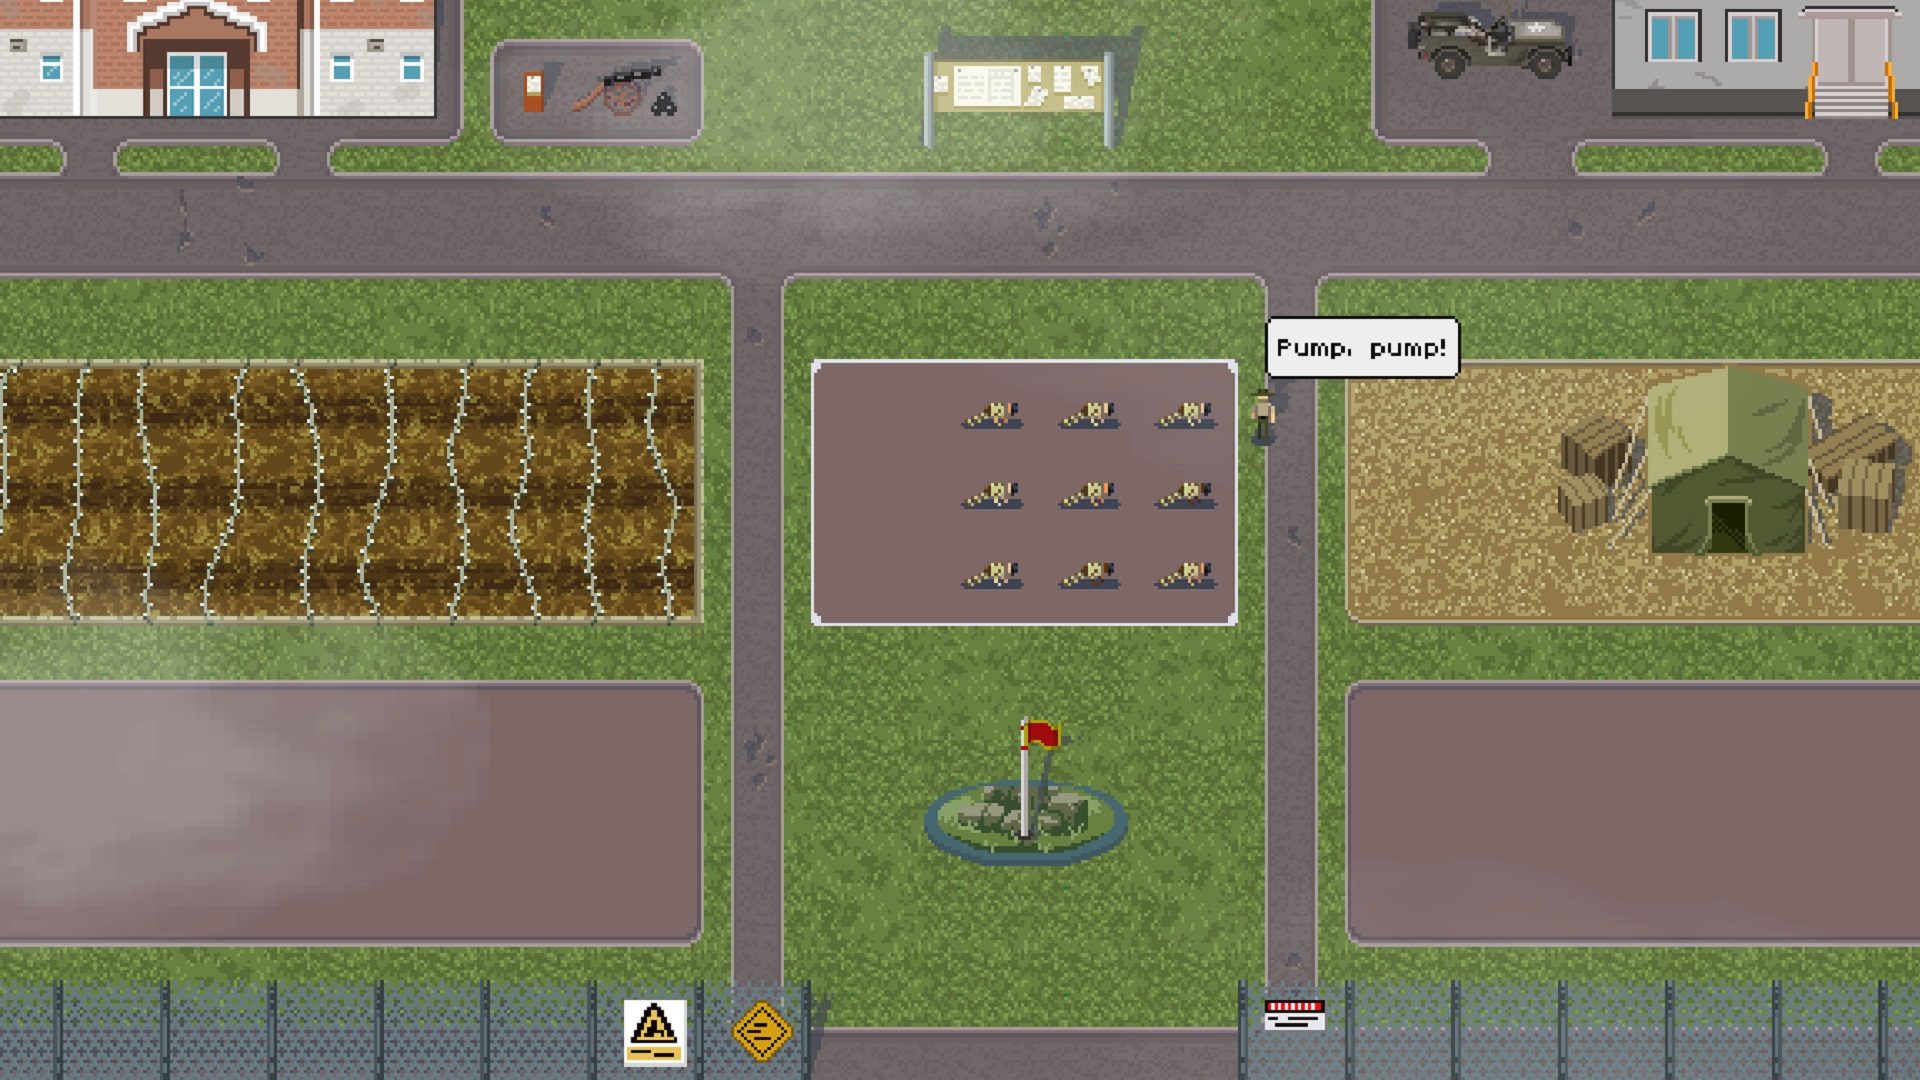 This boot camp management game is inspired by Full Metal Jacket’s drill sergeant